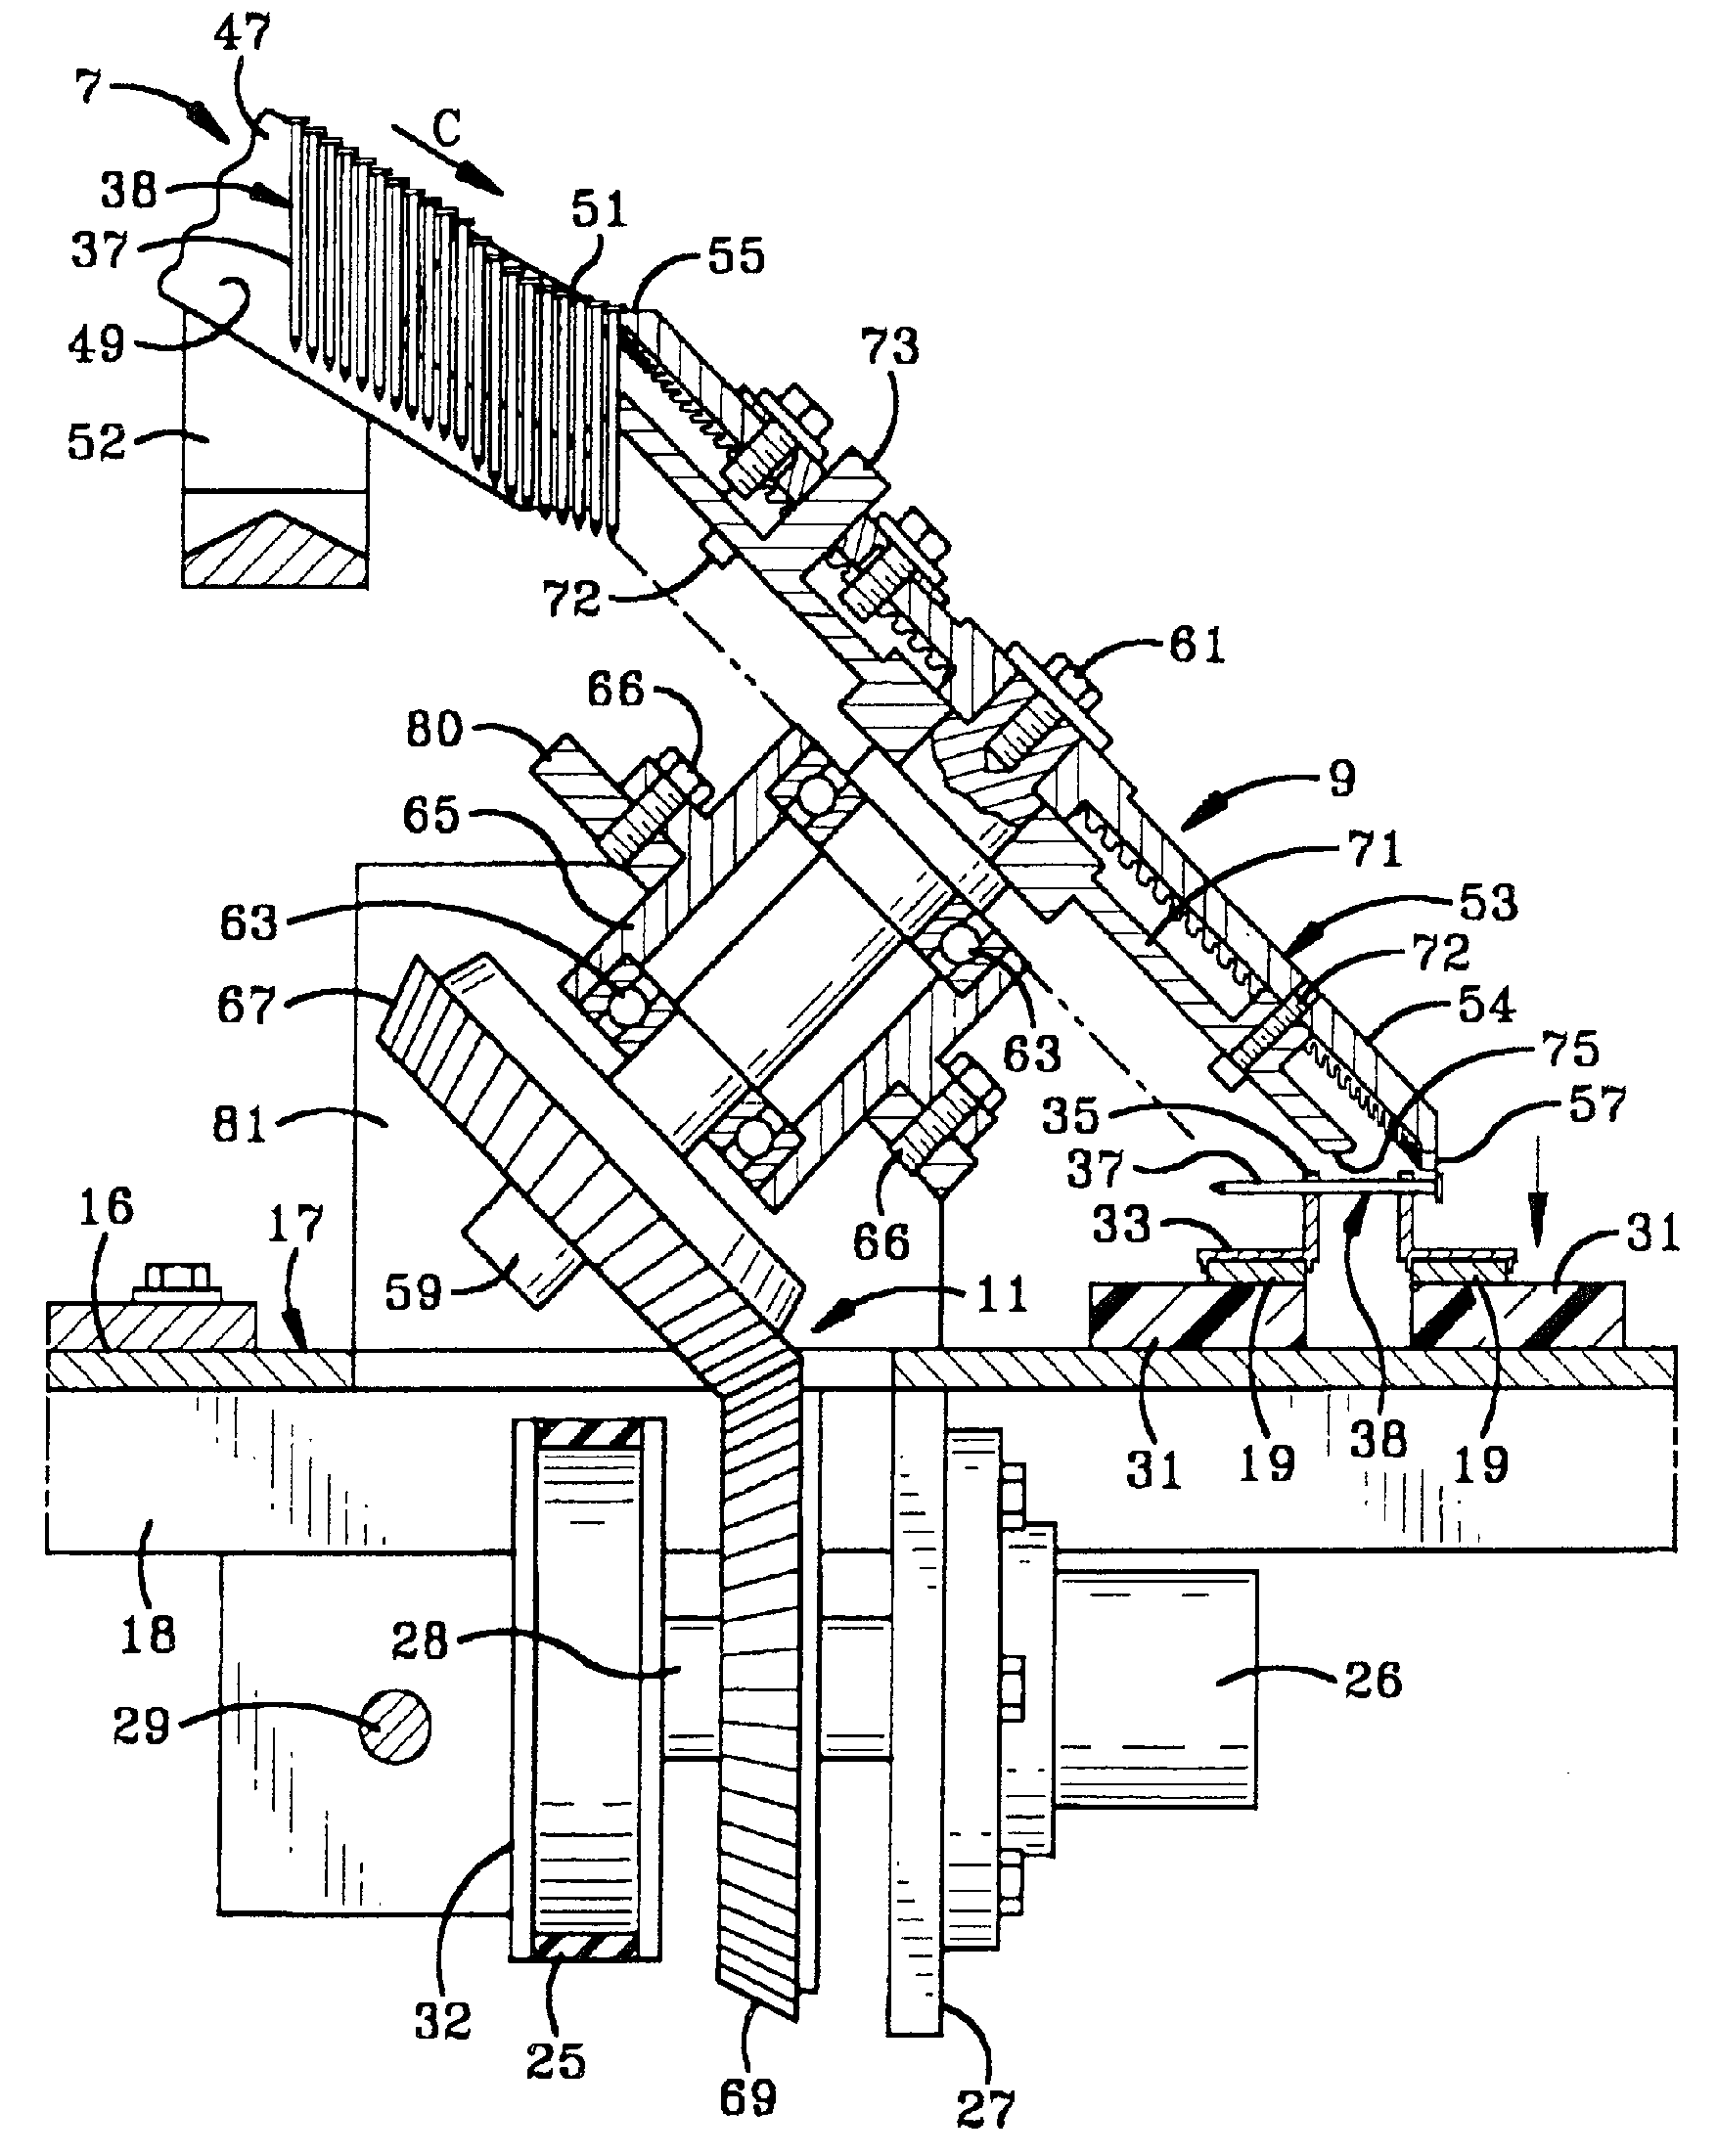 Method and apparatus for collating nails